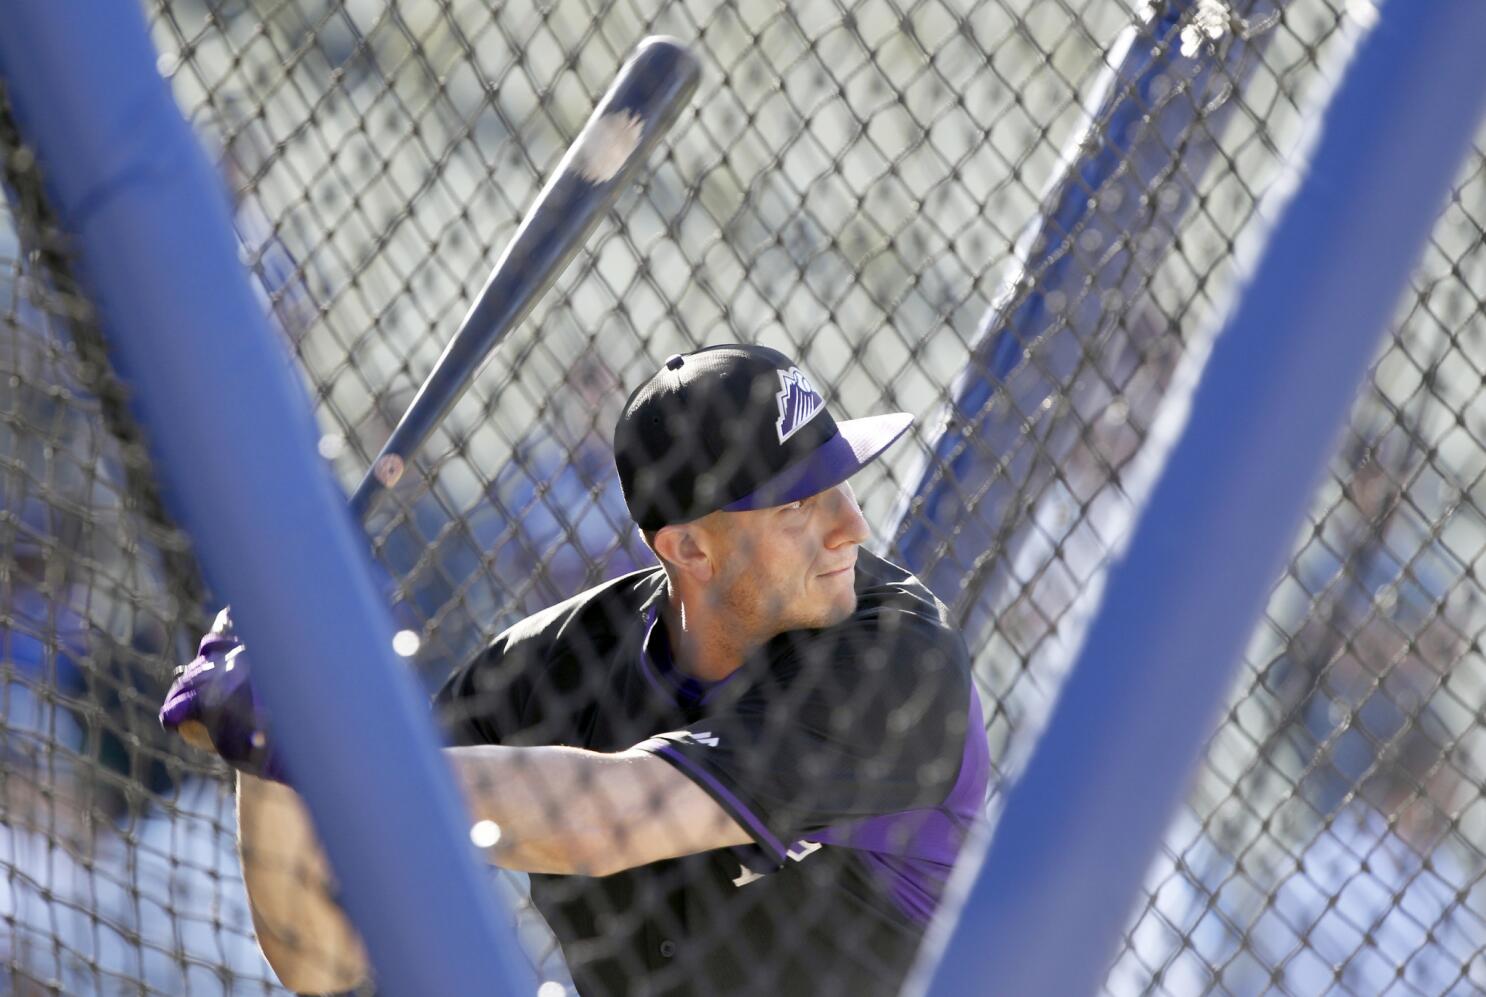 Troy Tulowitzki ends his career as an all-time Rockies great, but